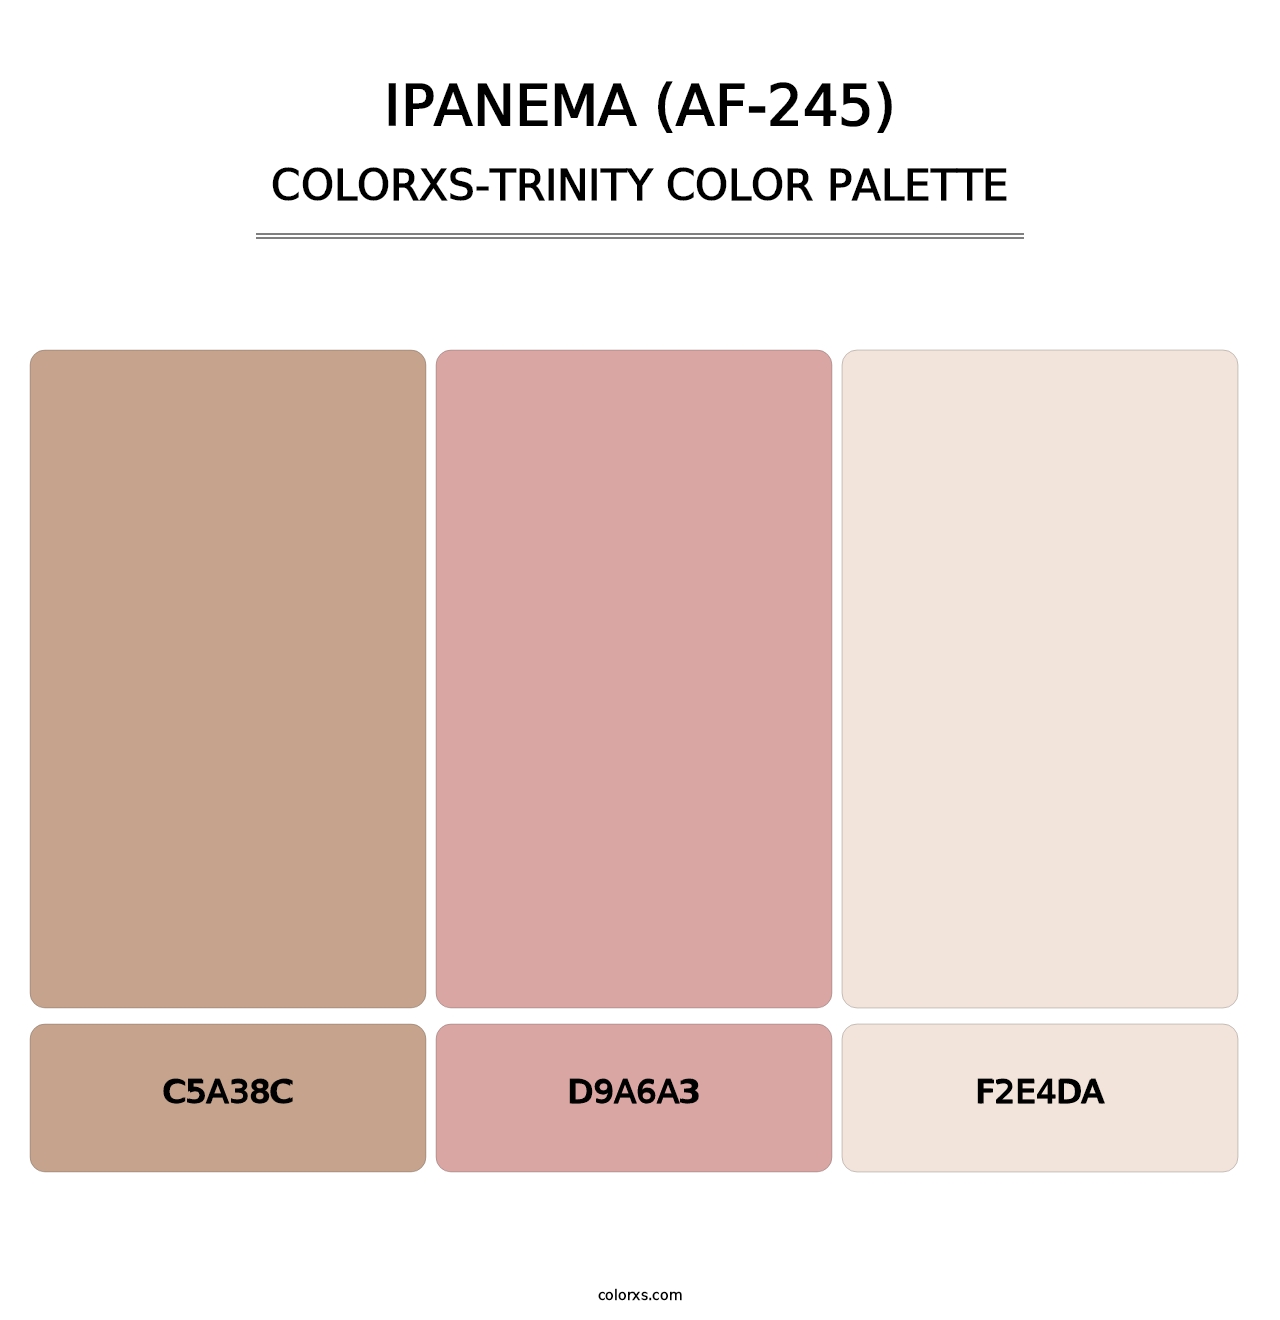 Ipanema (AF-245) - Colorxs Trinity Palette